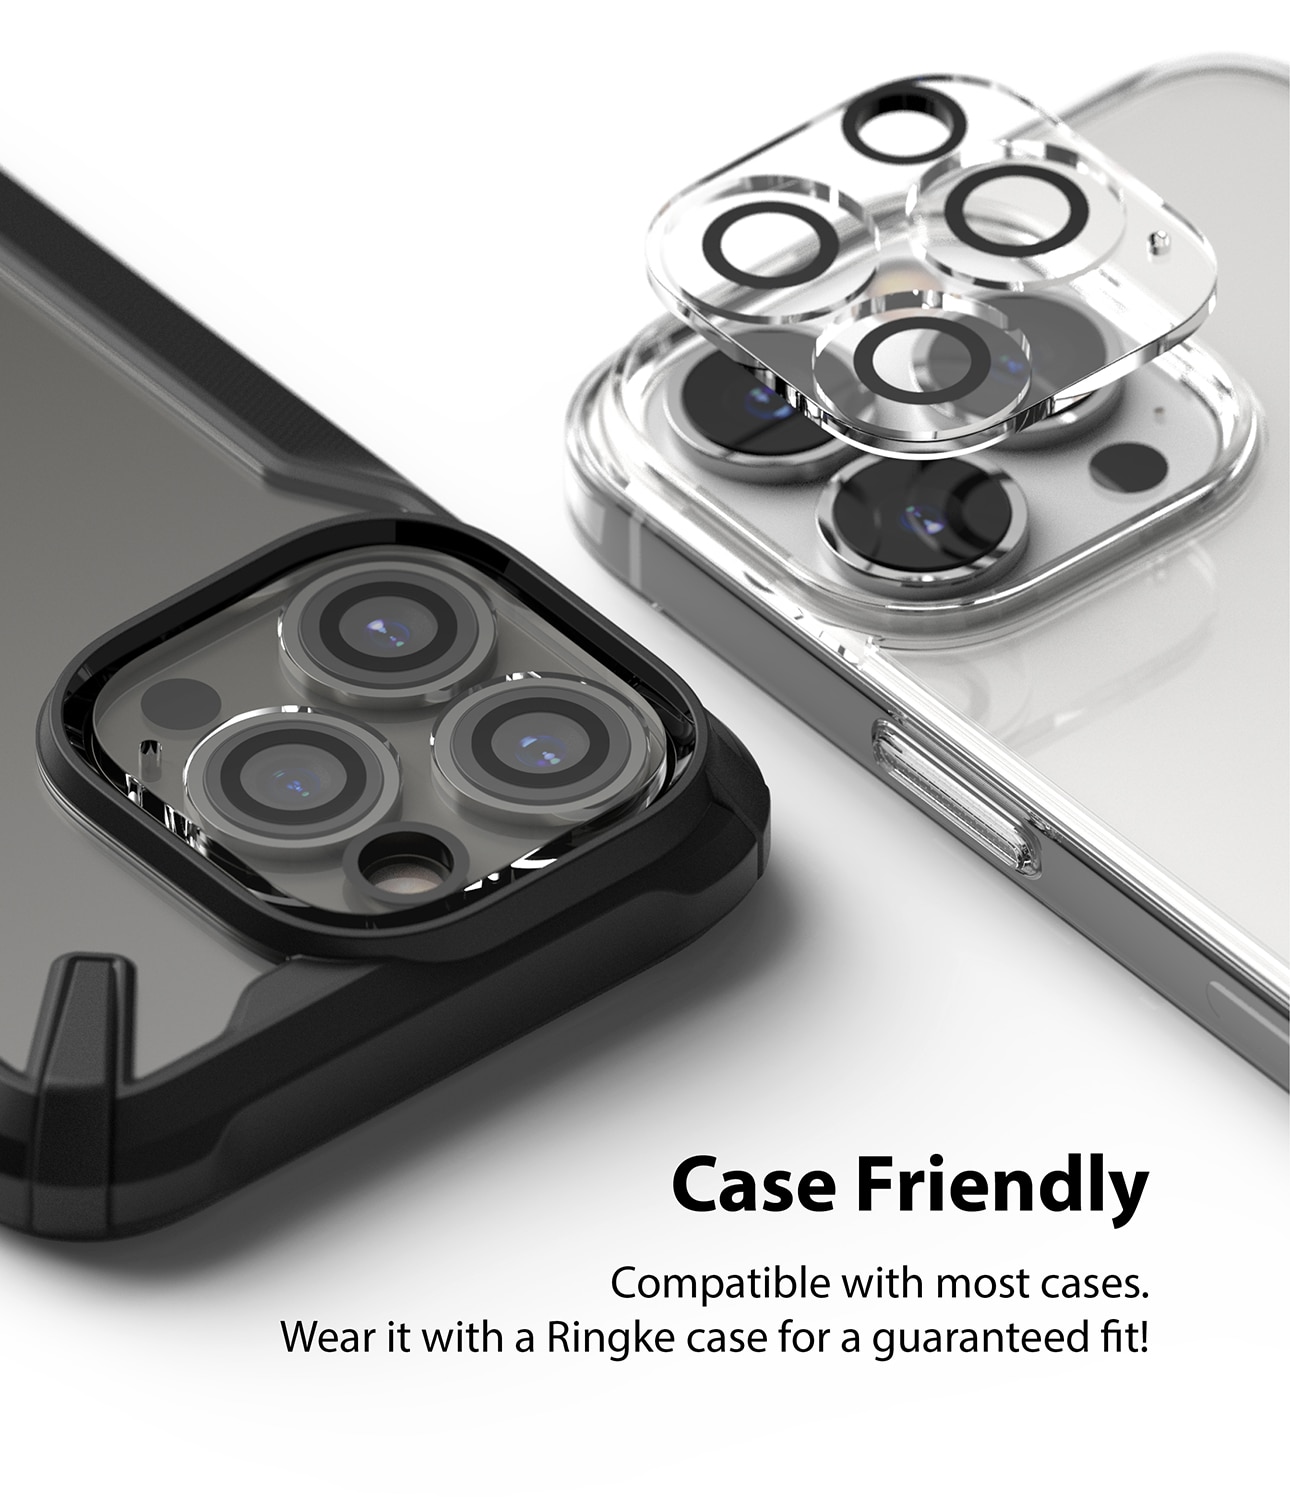 Camera Protector Glass (2-pack) iPhone 13 Pro Max